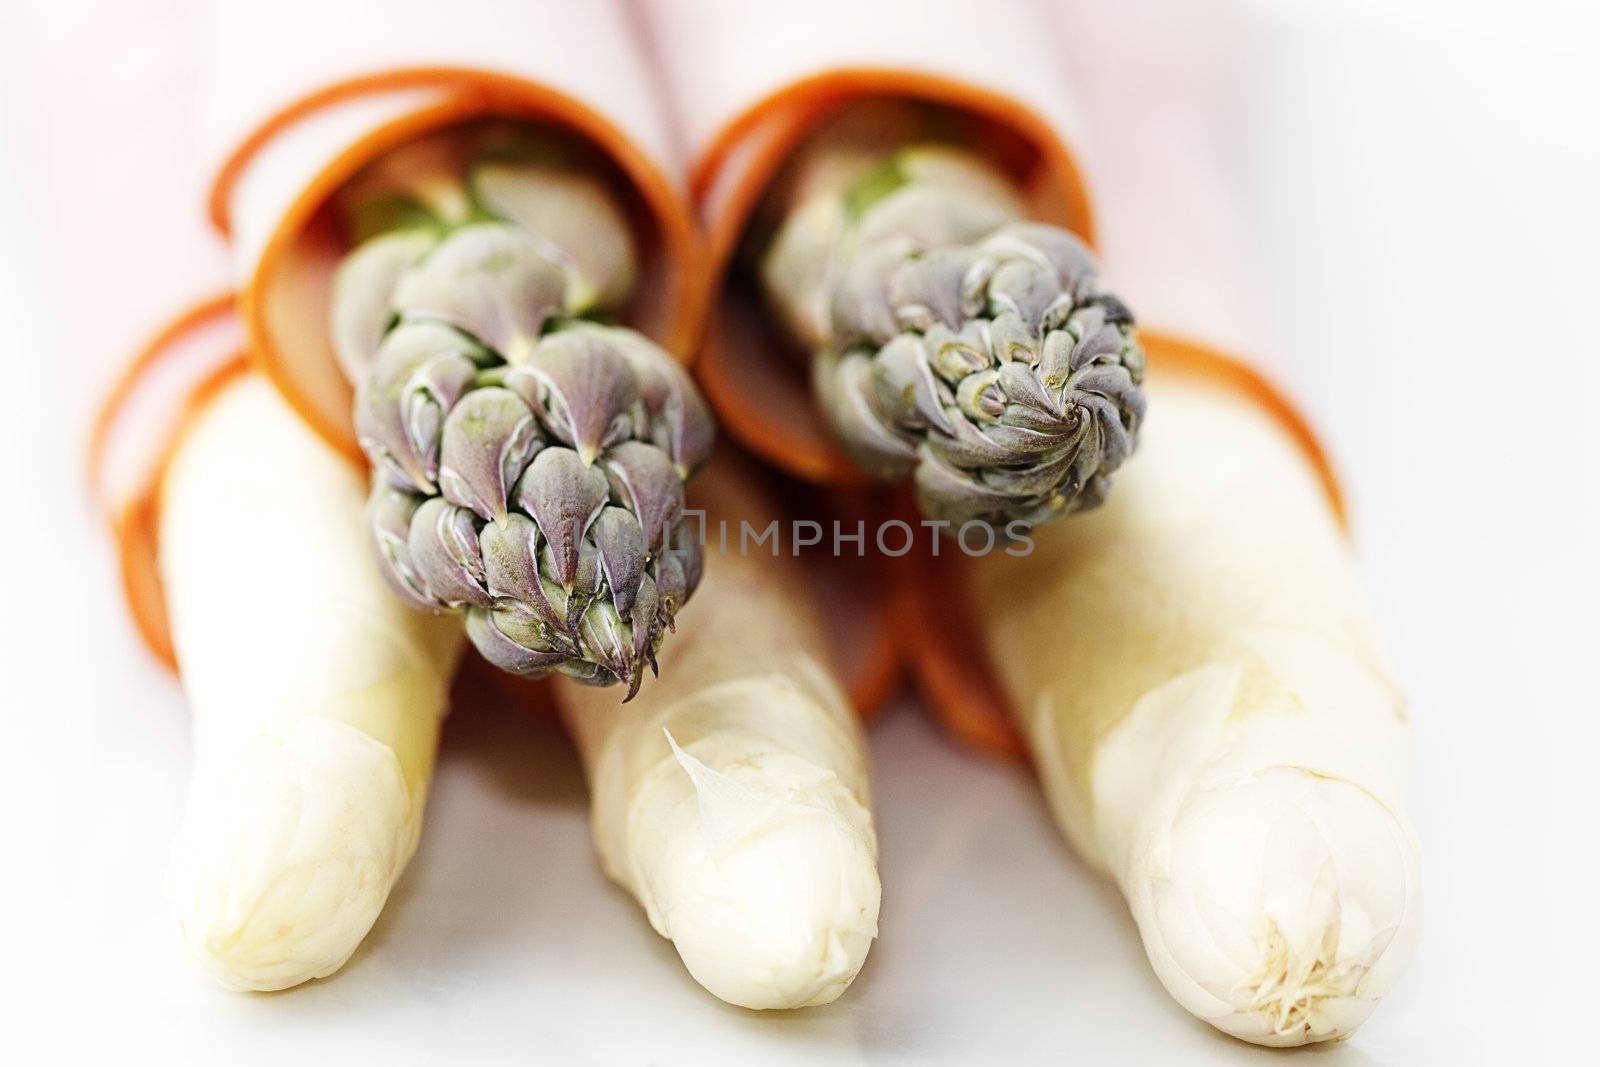 closeup of some green and white asparagus tips enrolled with ham